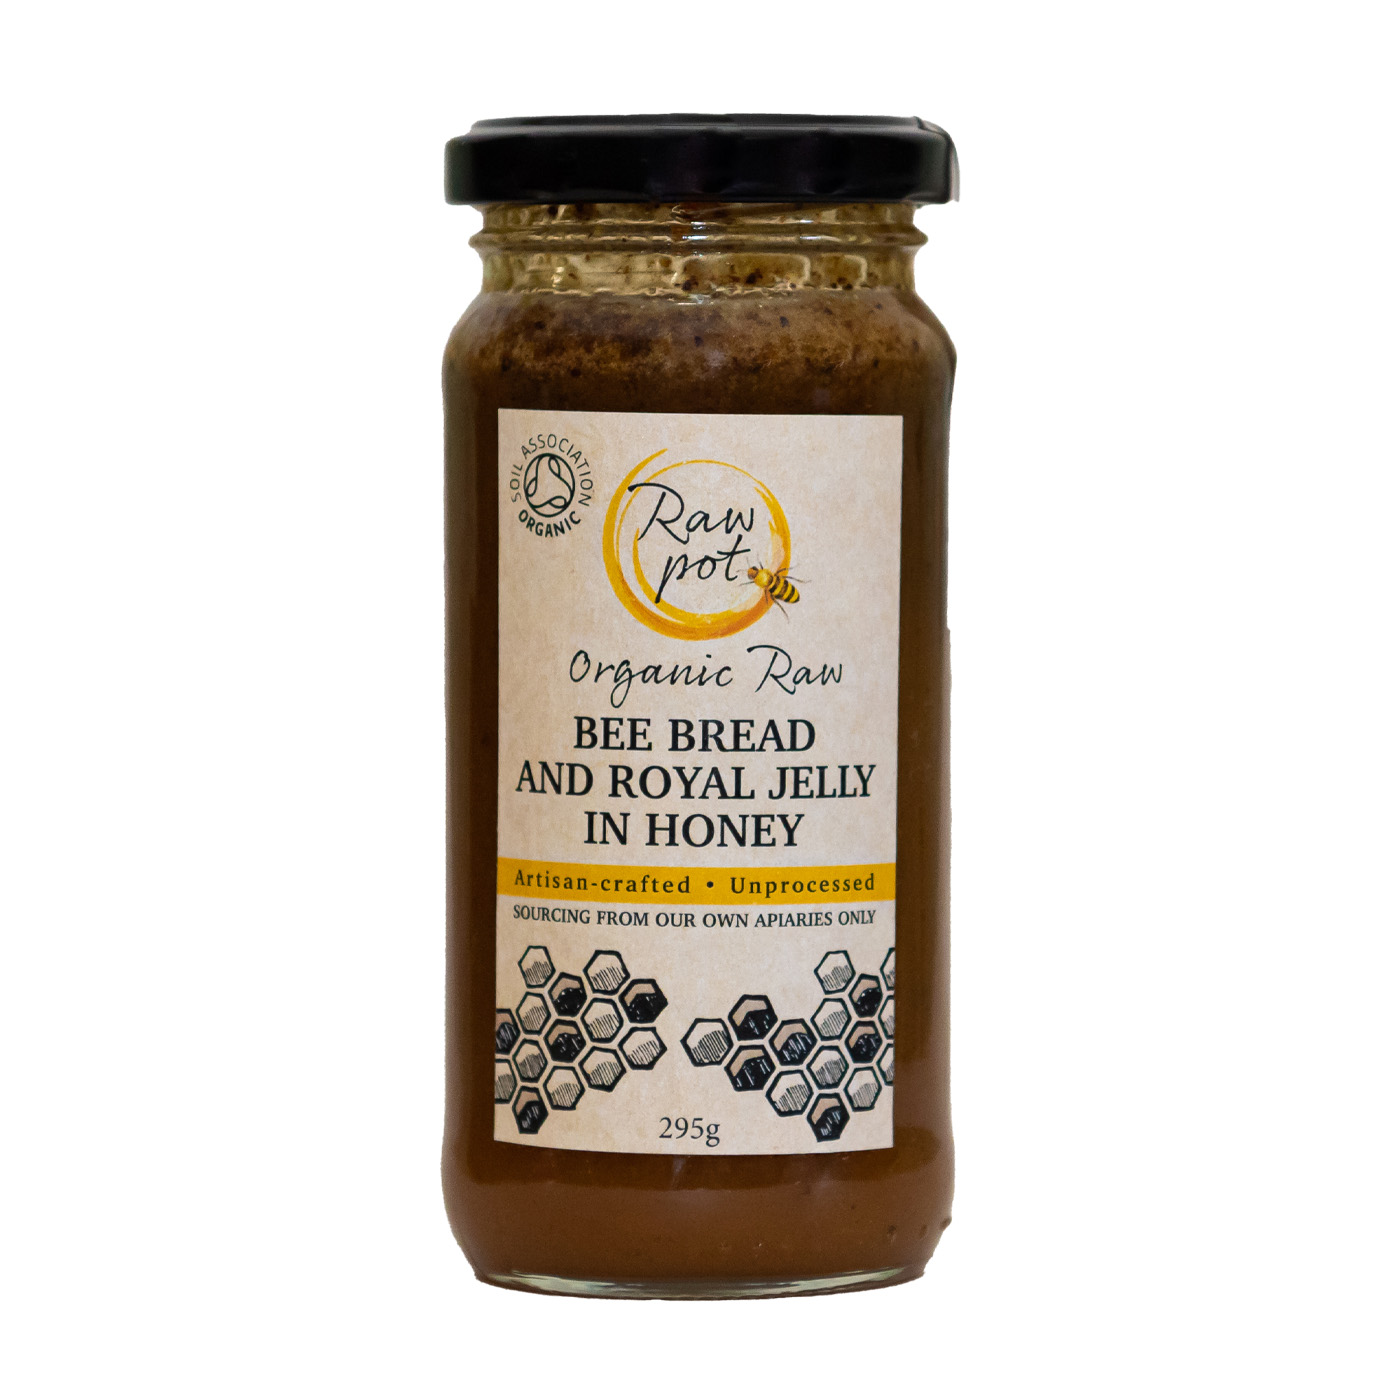 Organic Raw Bee Bread with Royal Jelly in Honey